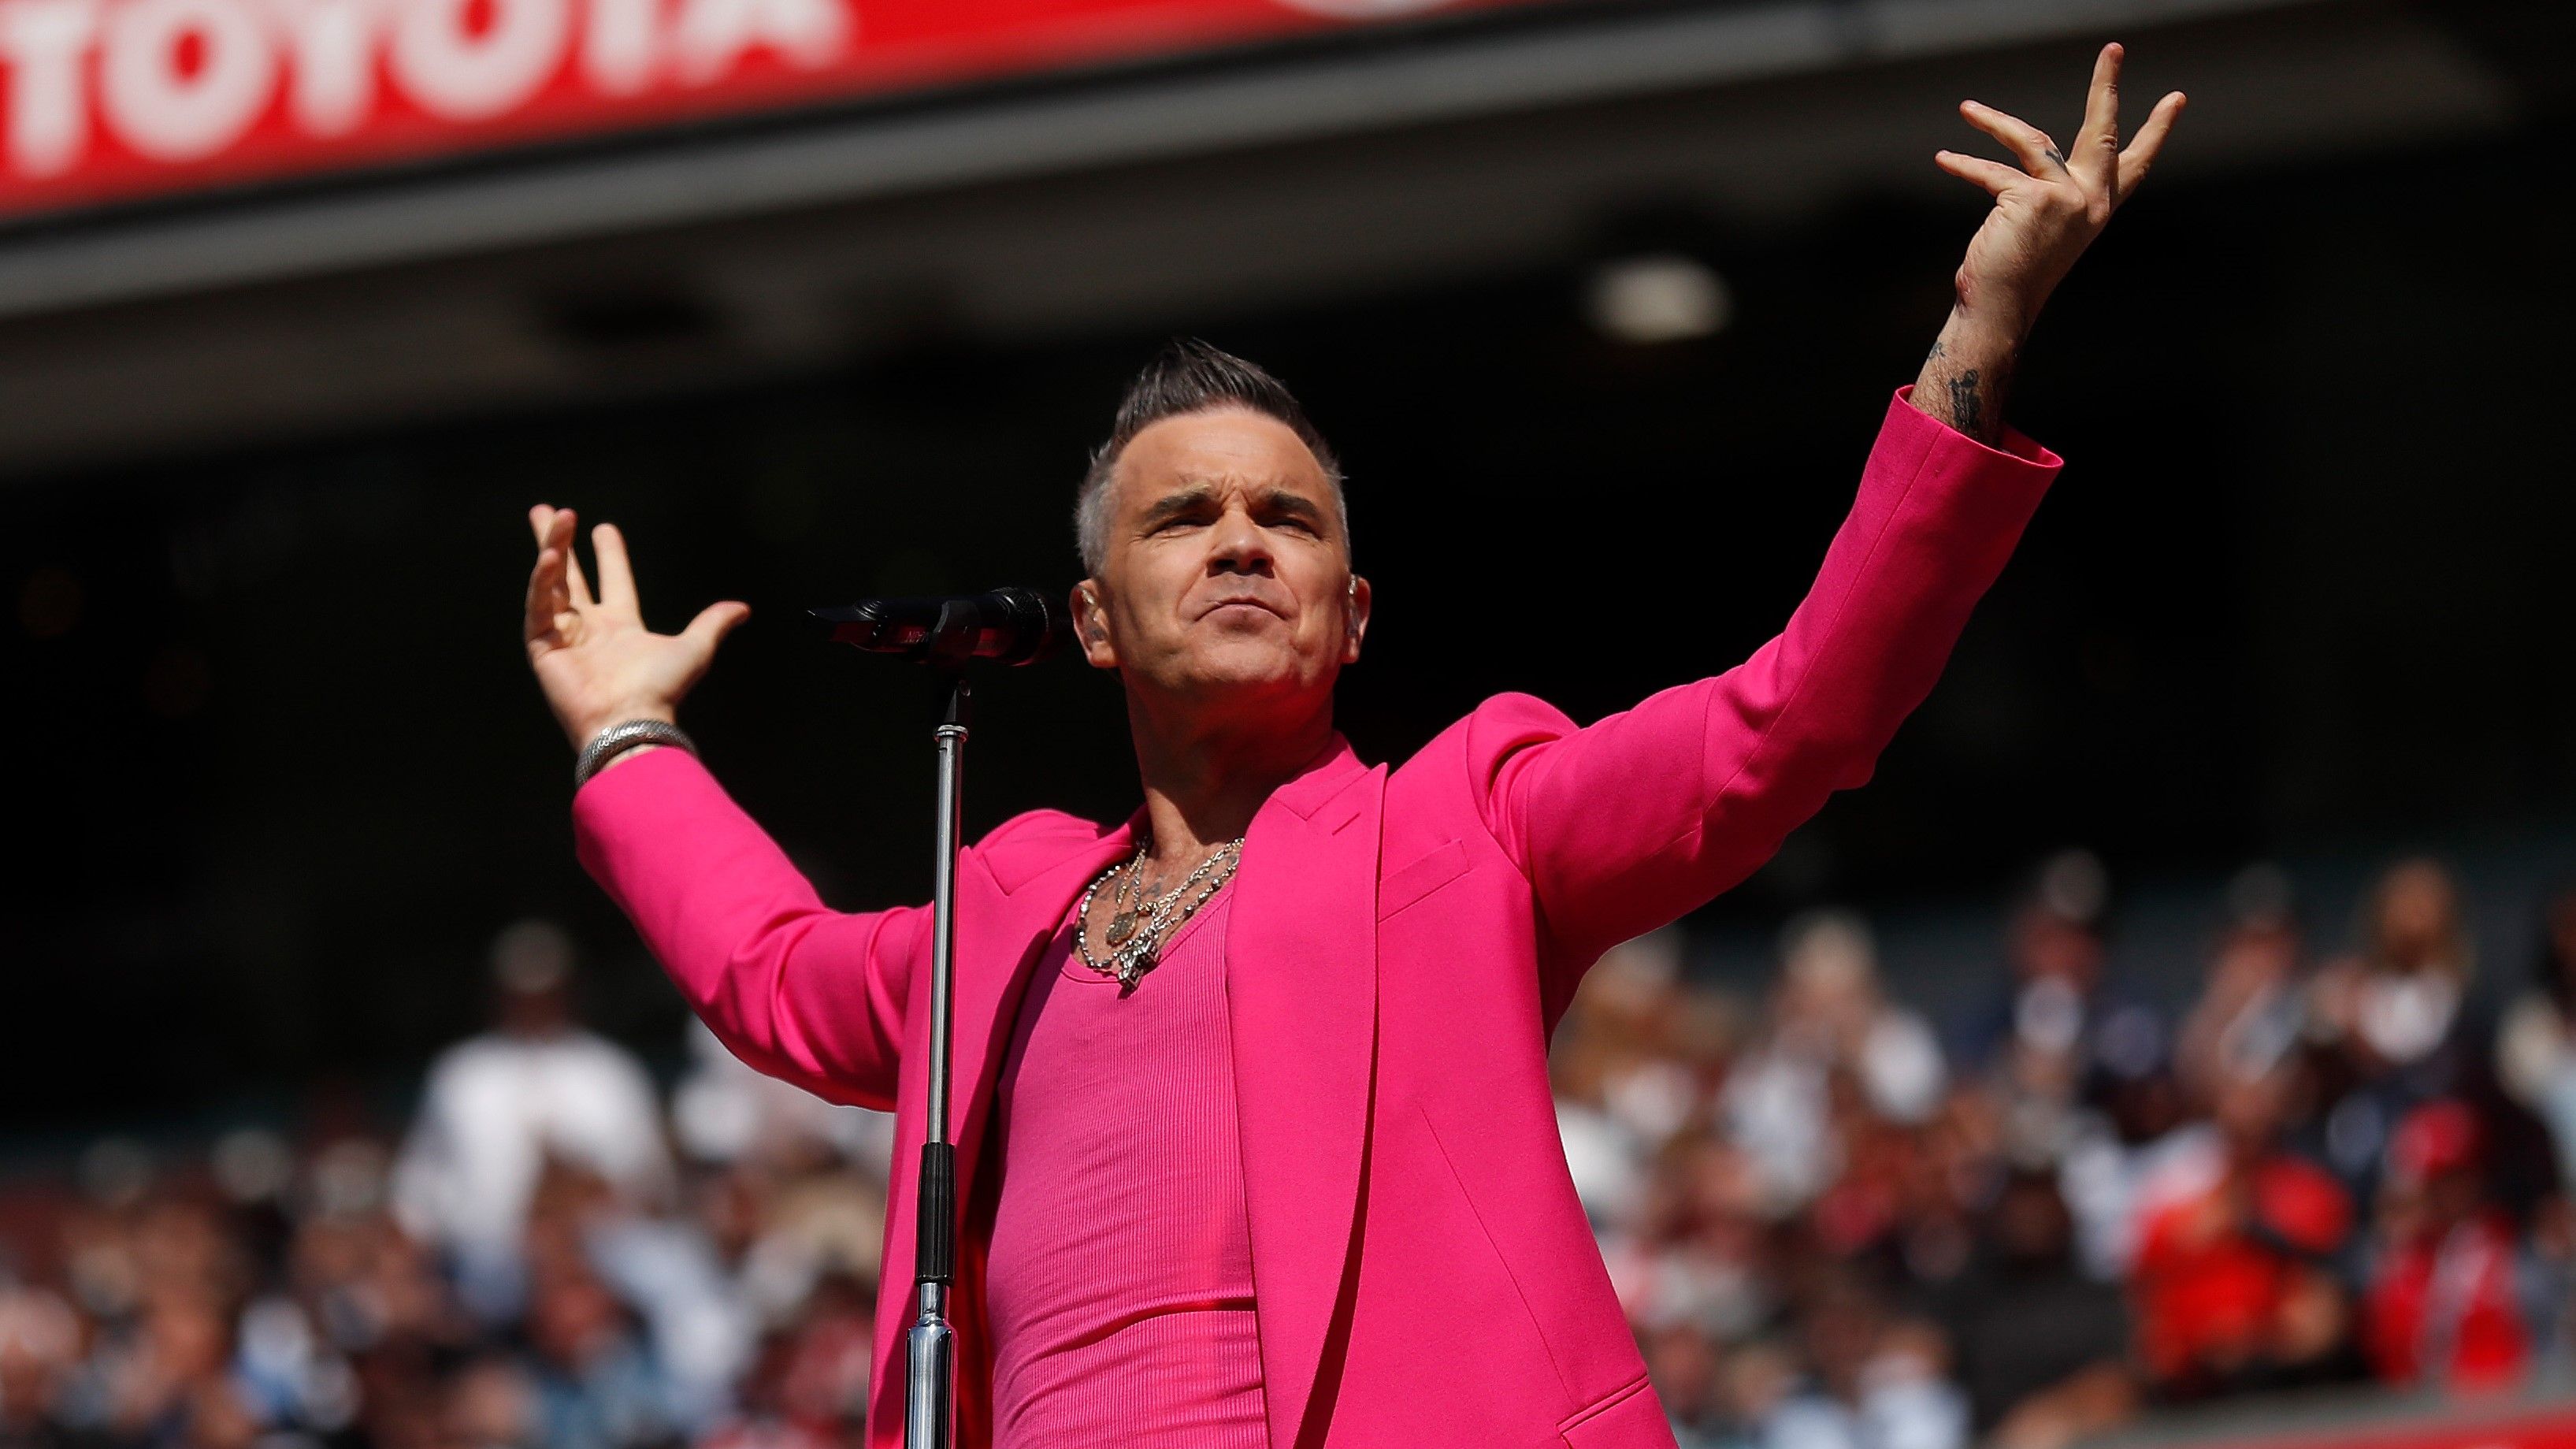 Robbie Williams performs during the 2022 AFL Grand Final match between the Geelong Cats and the Sydney Swans at the Melbourne Cricket Ground.